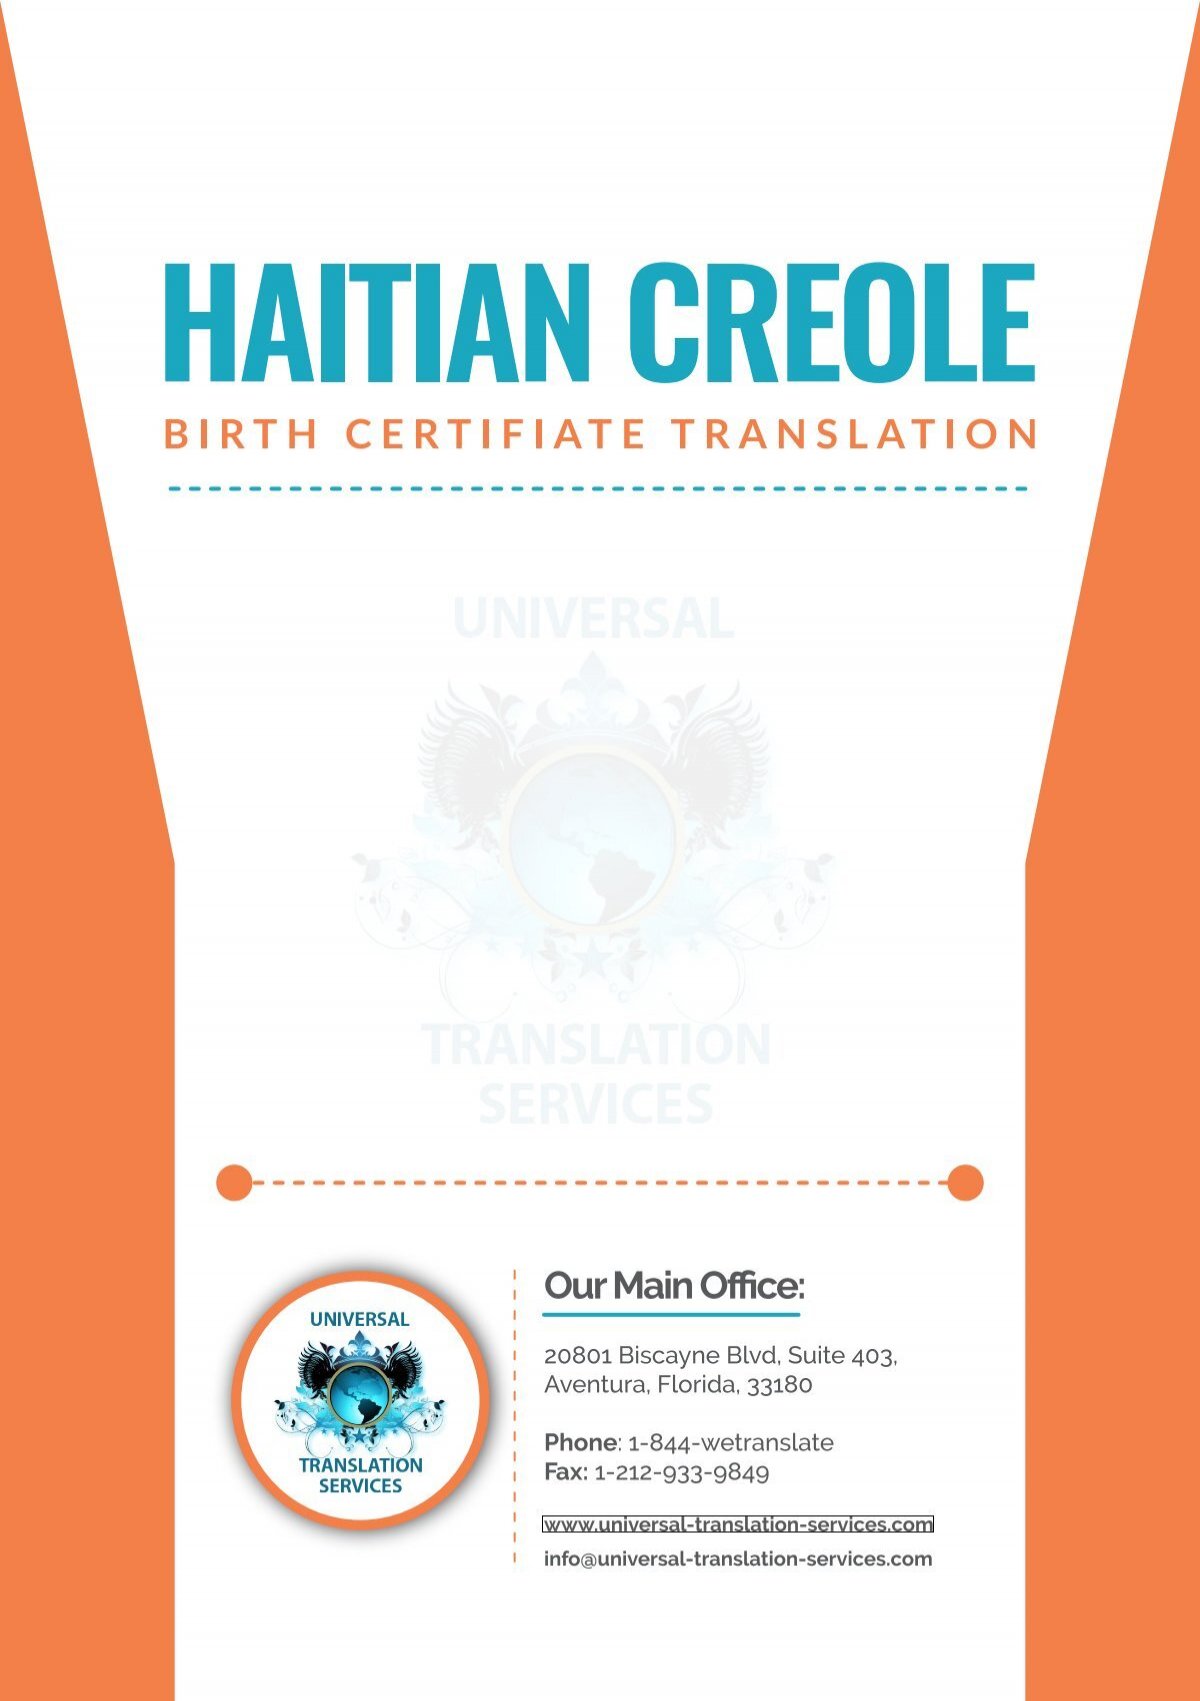 Haitian Creole Translation Facts Have A Look At Our I vrogue co